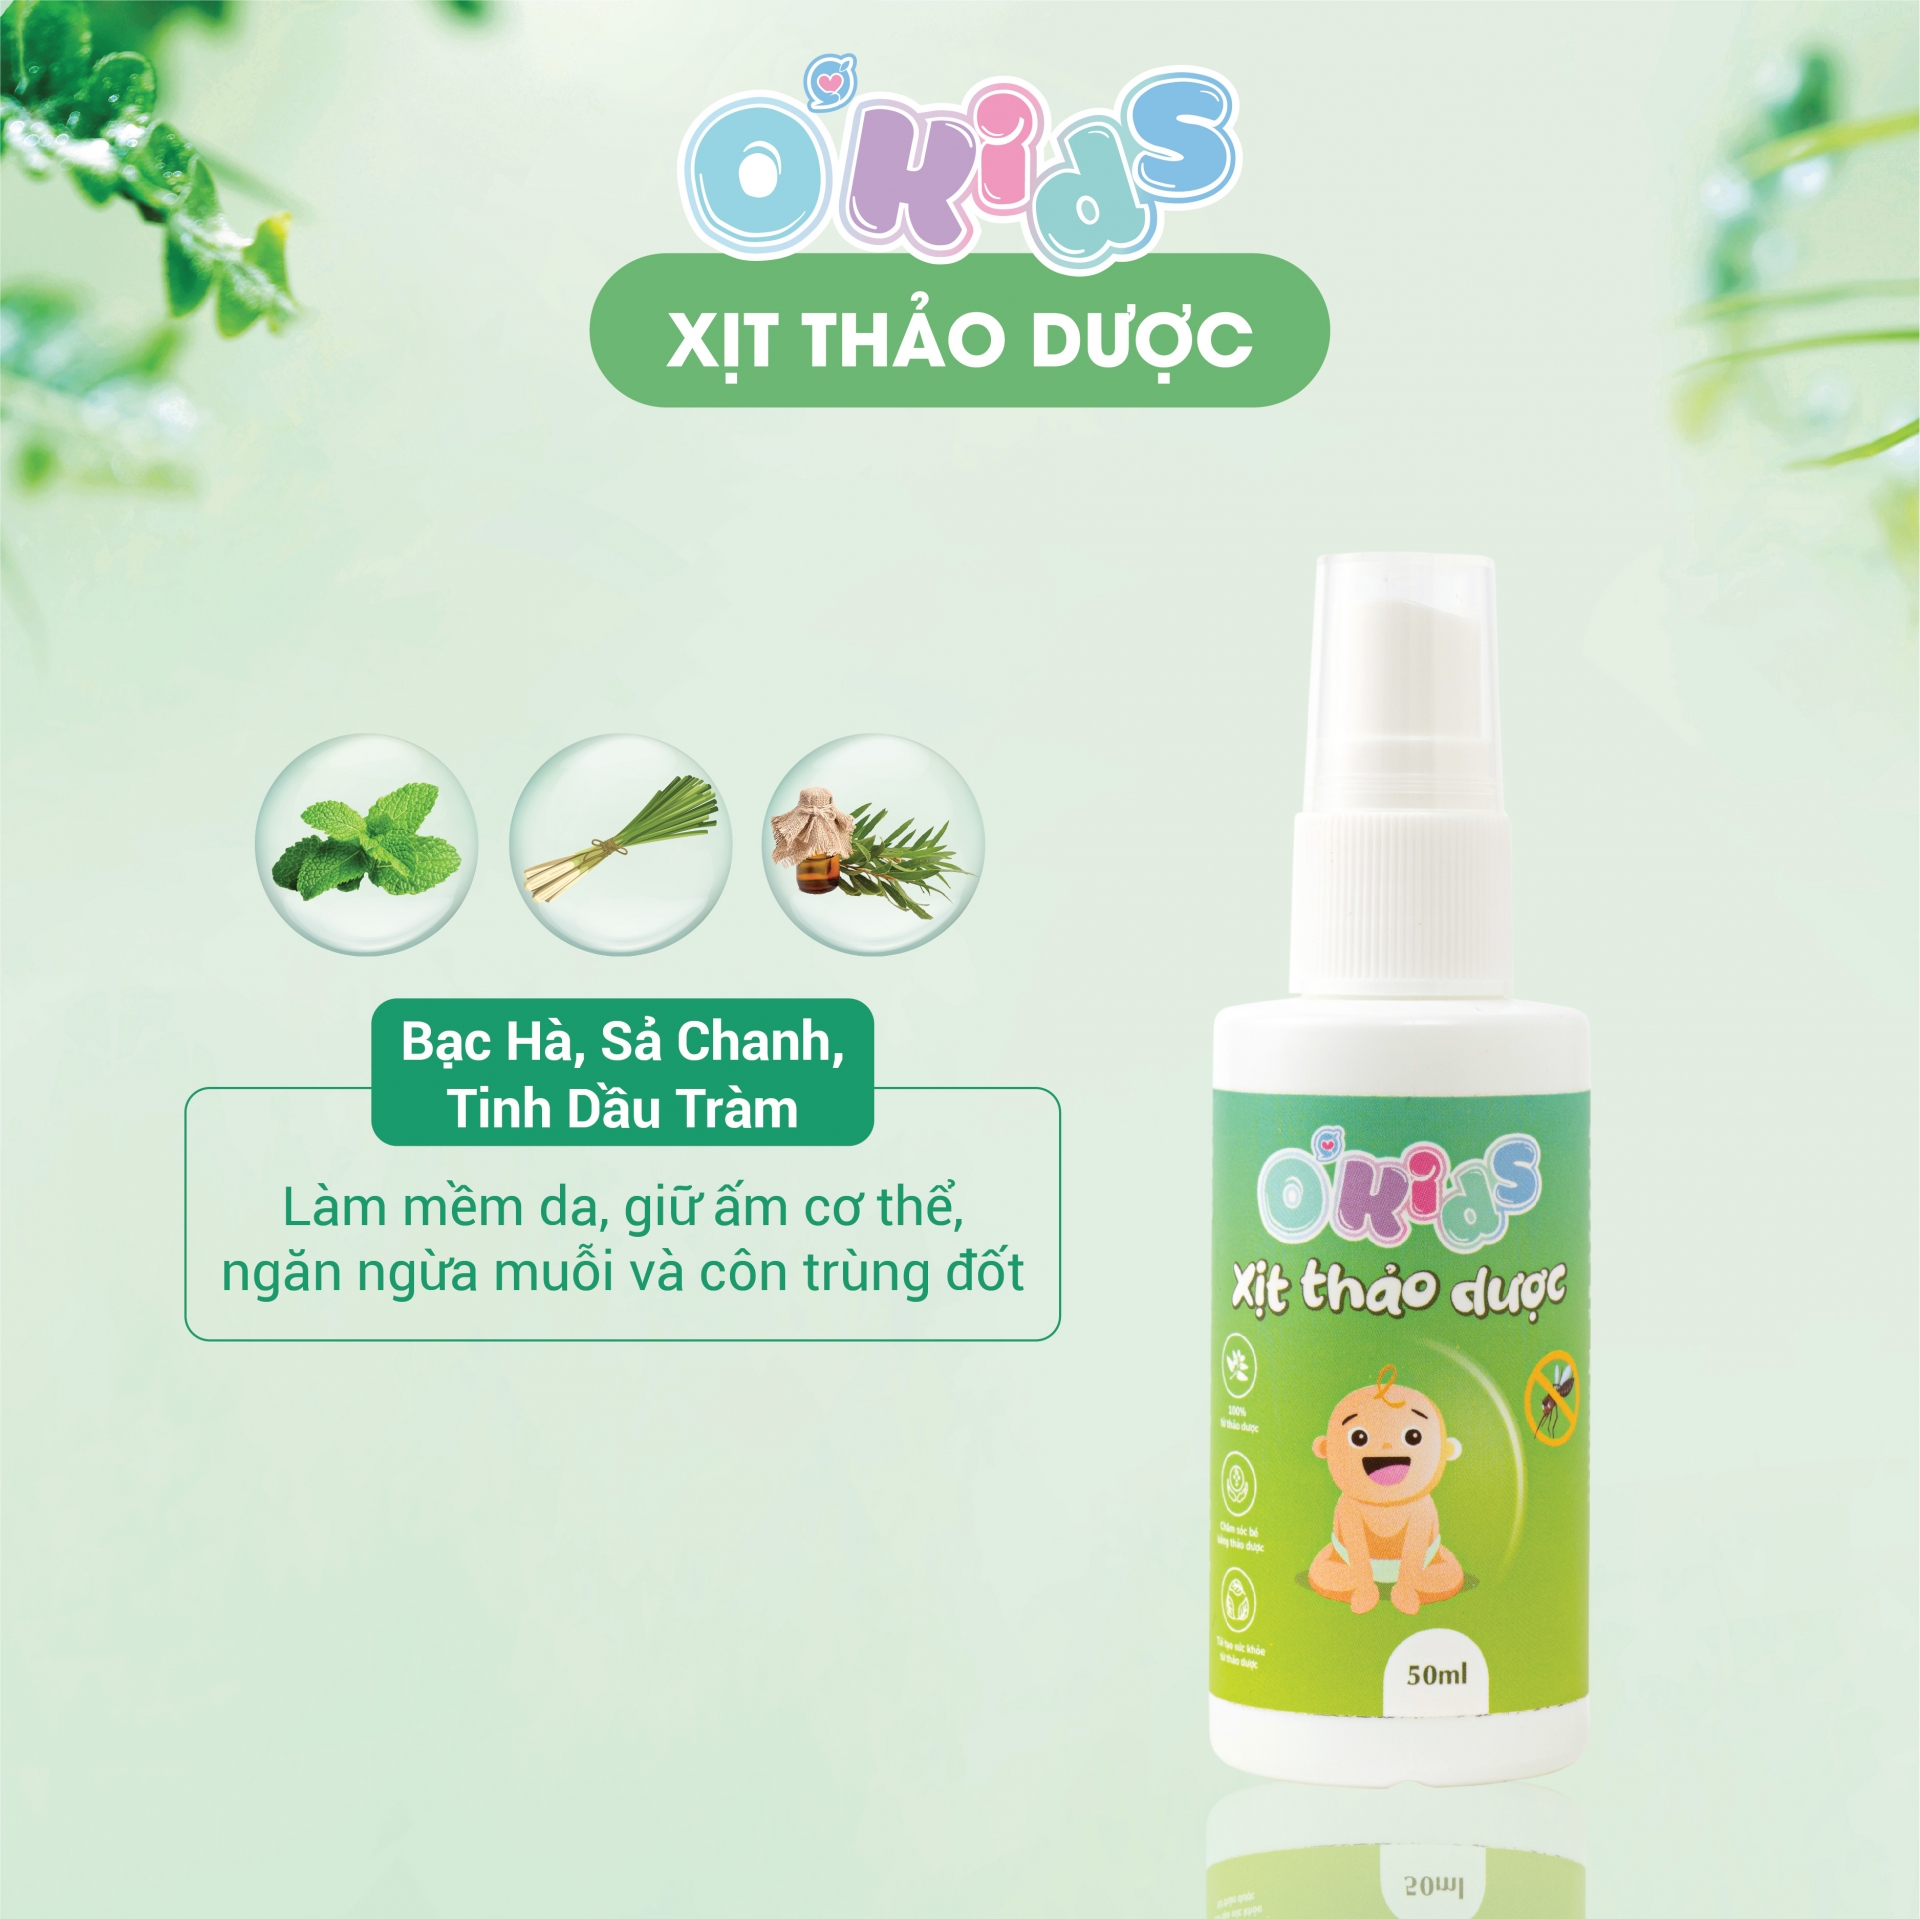 xit-chong-muoi-thao-duoc-3